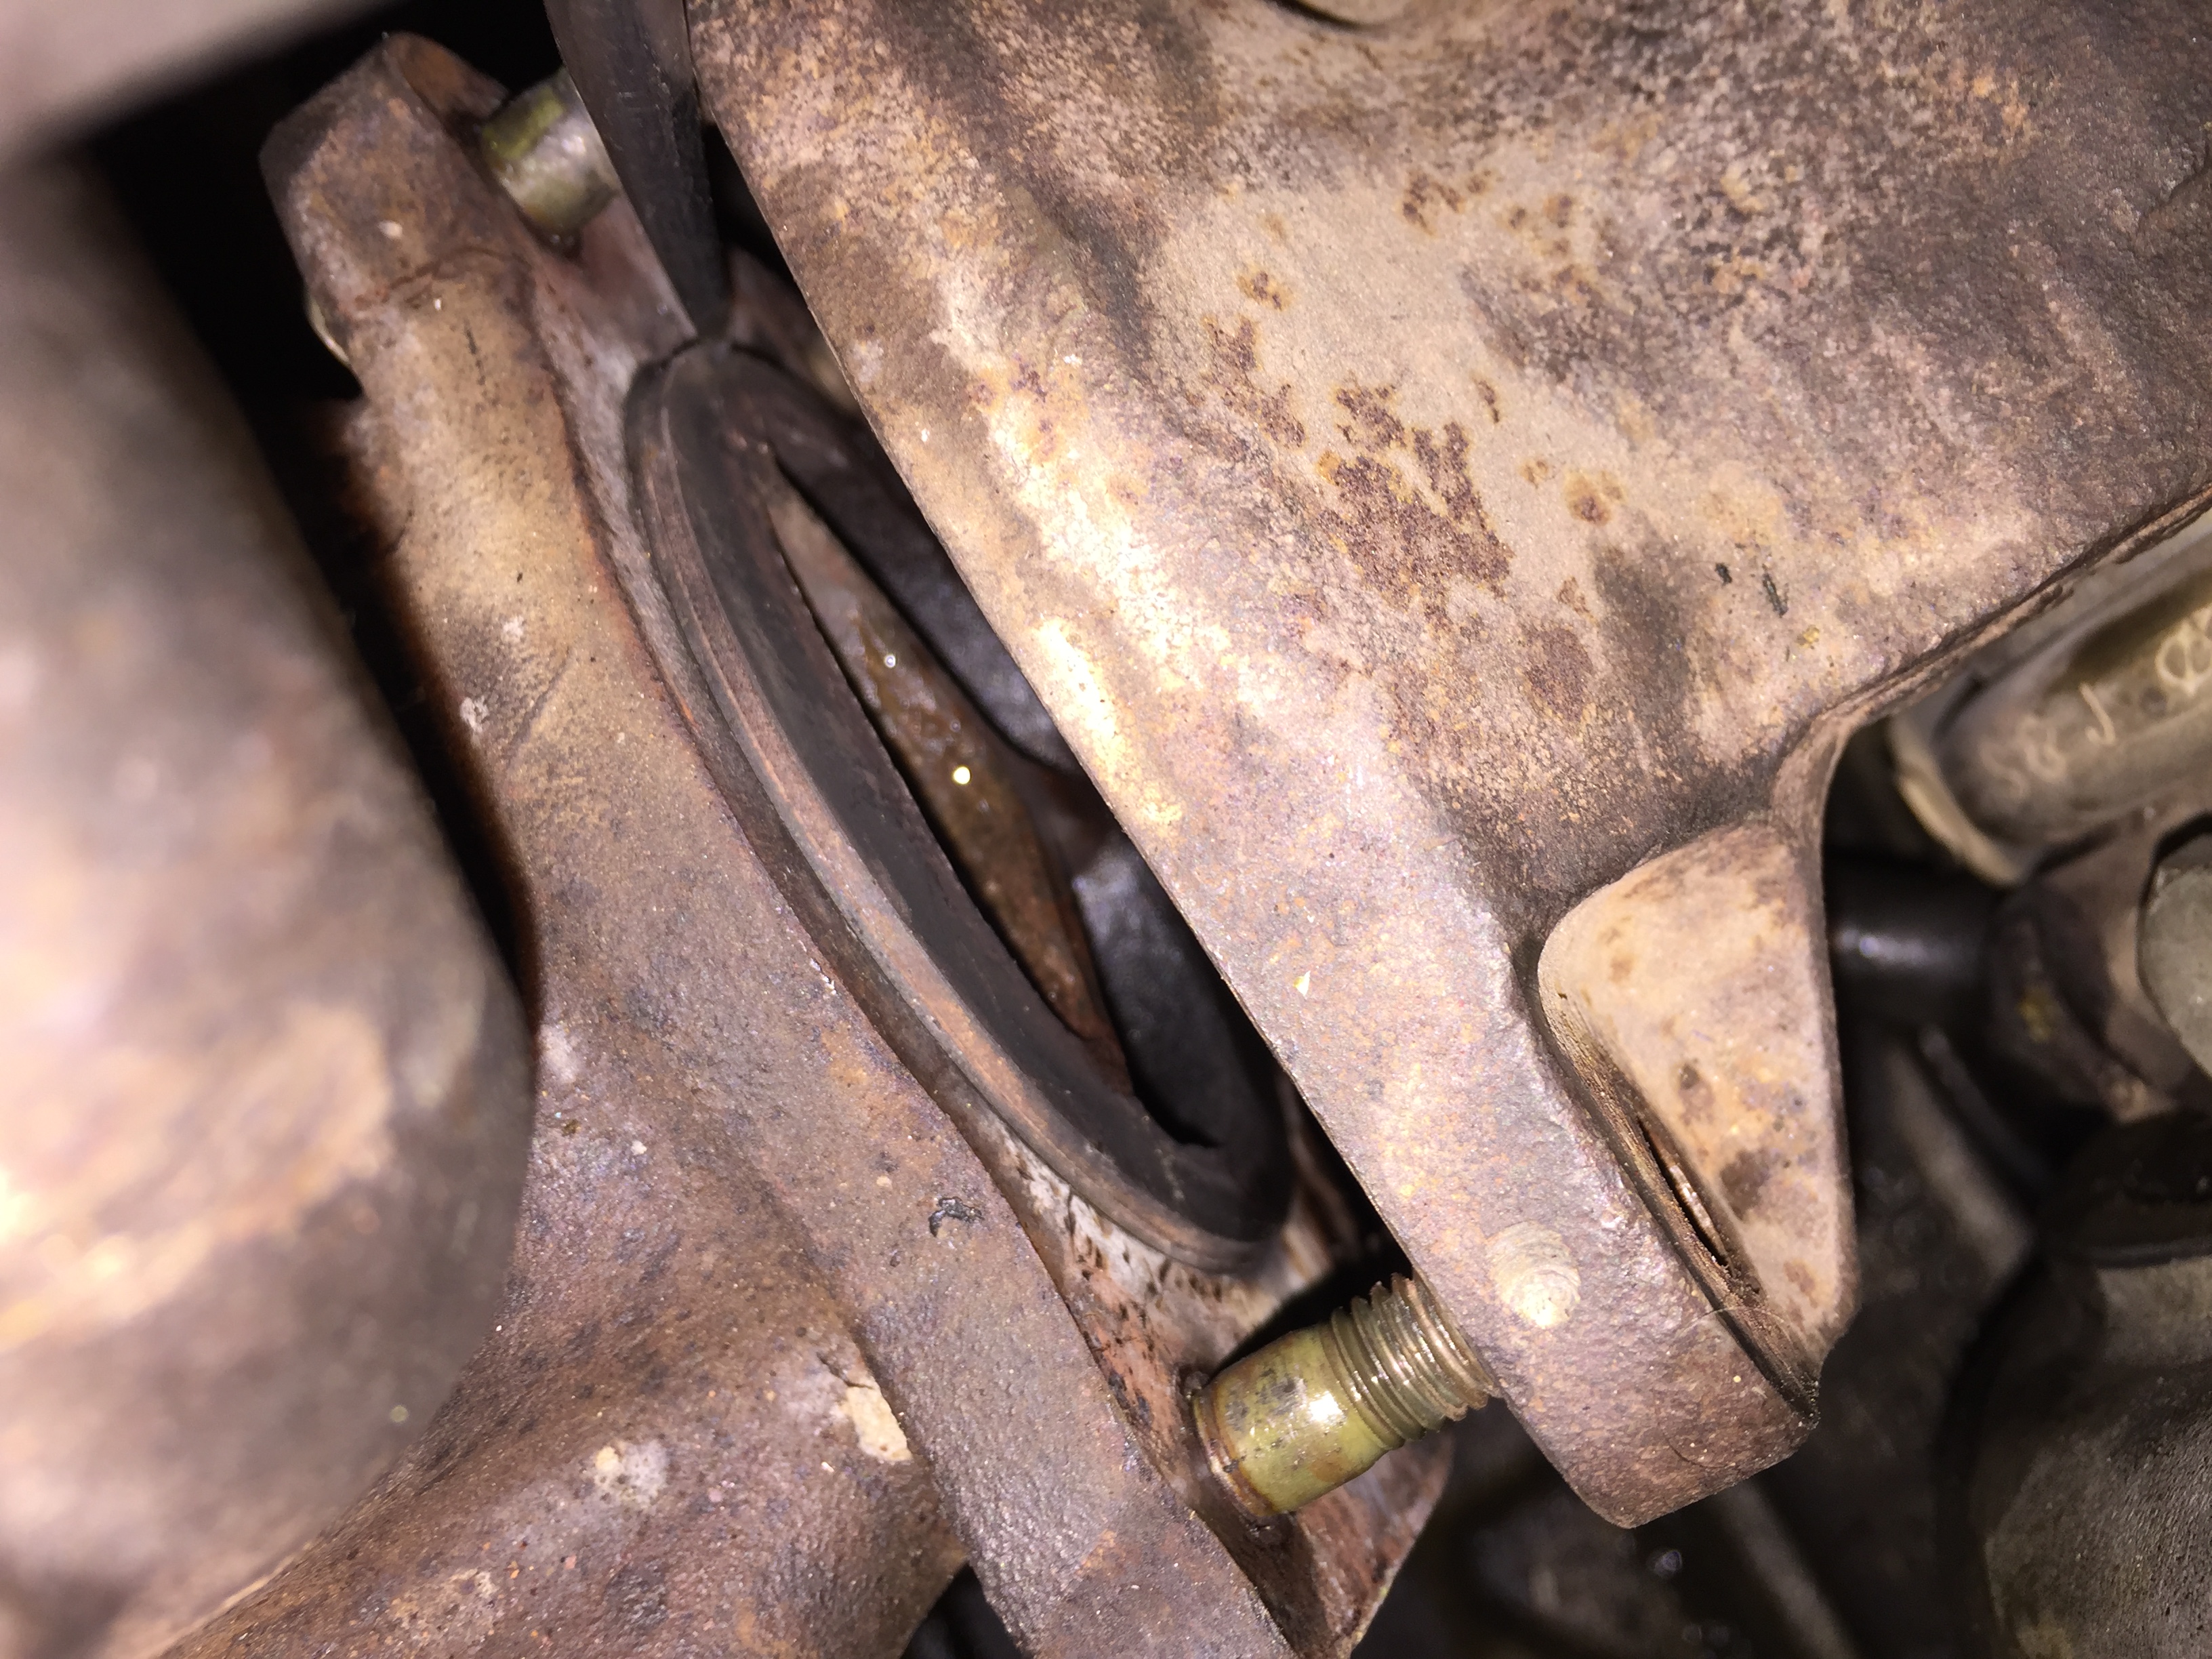 coolant leaking from gasket of exhuast manifold - Volvo Forums - Volvo